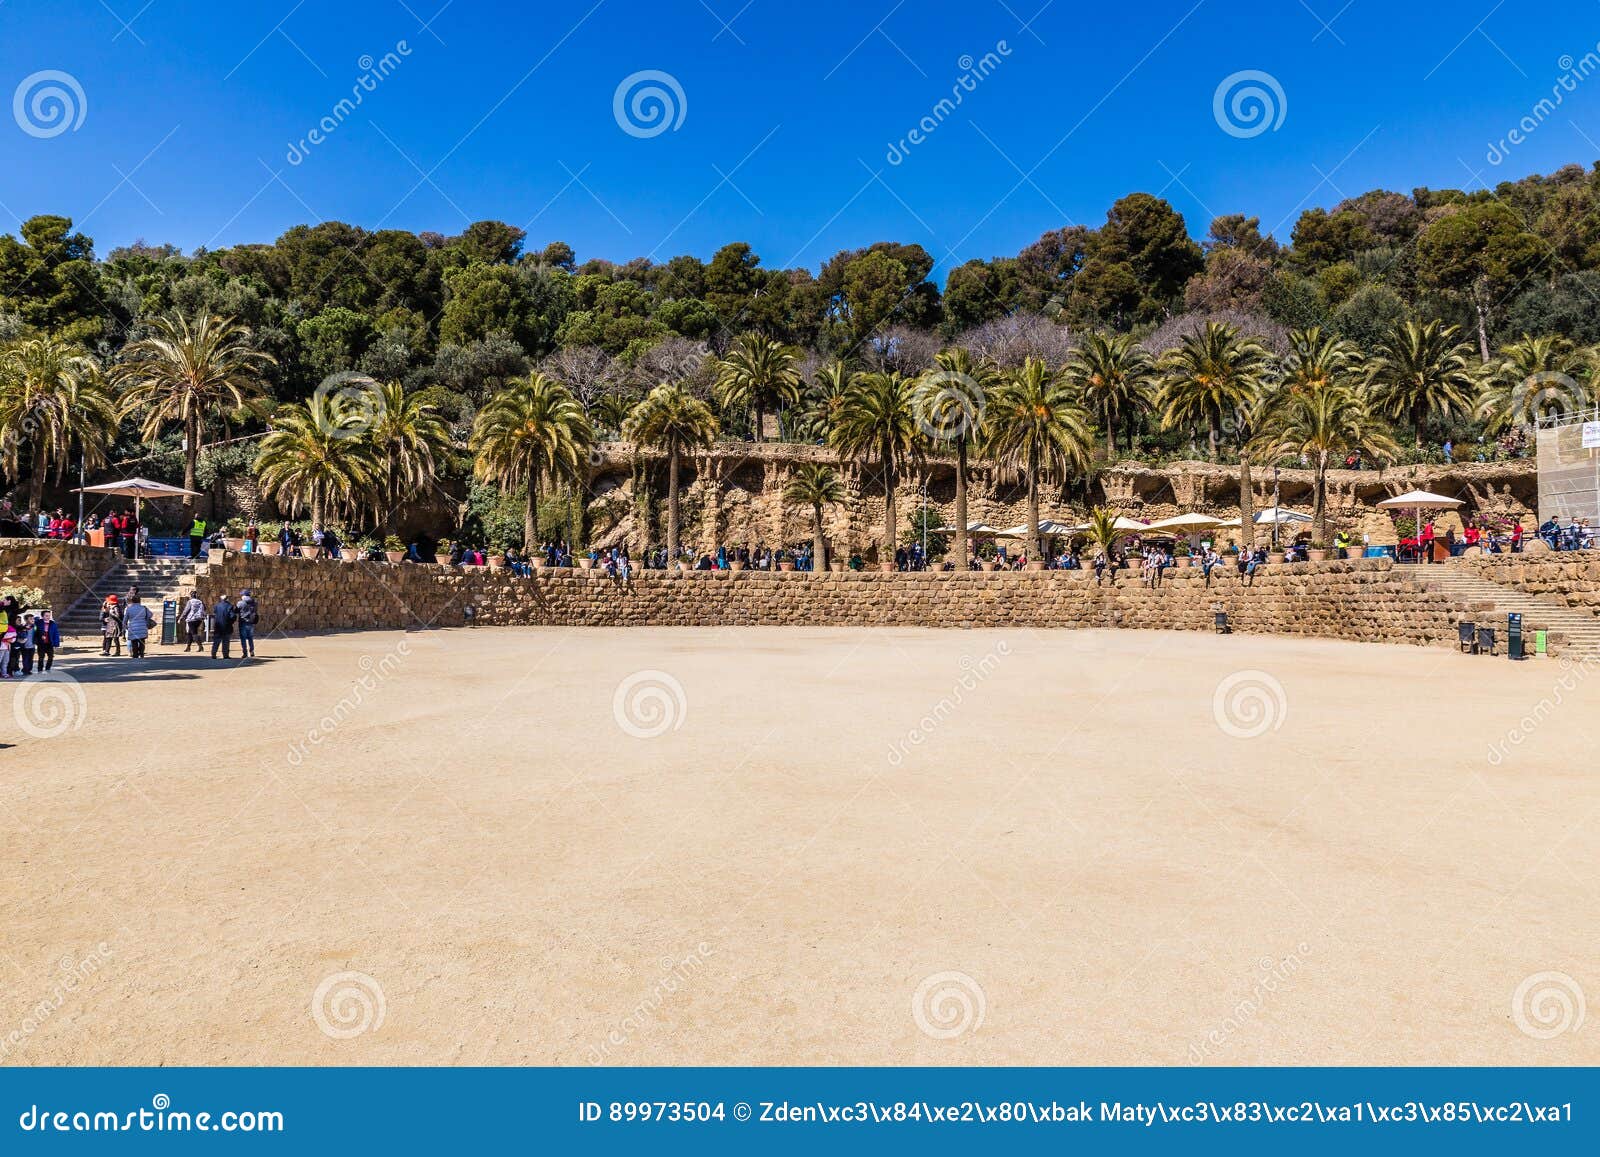 Nature Square - Park Guell, Barcelona, Spain Editorial Image Image of guell, sand: 89973504